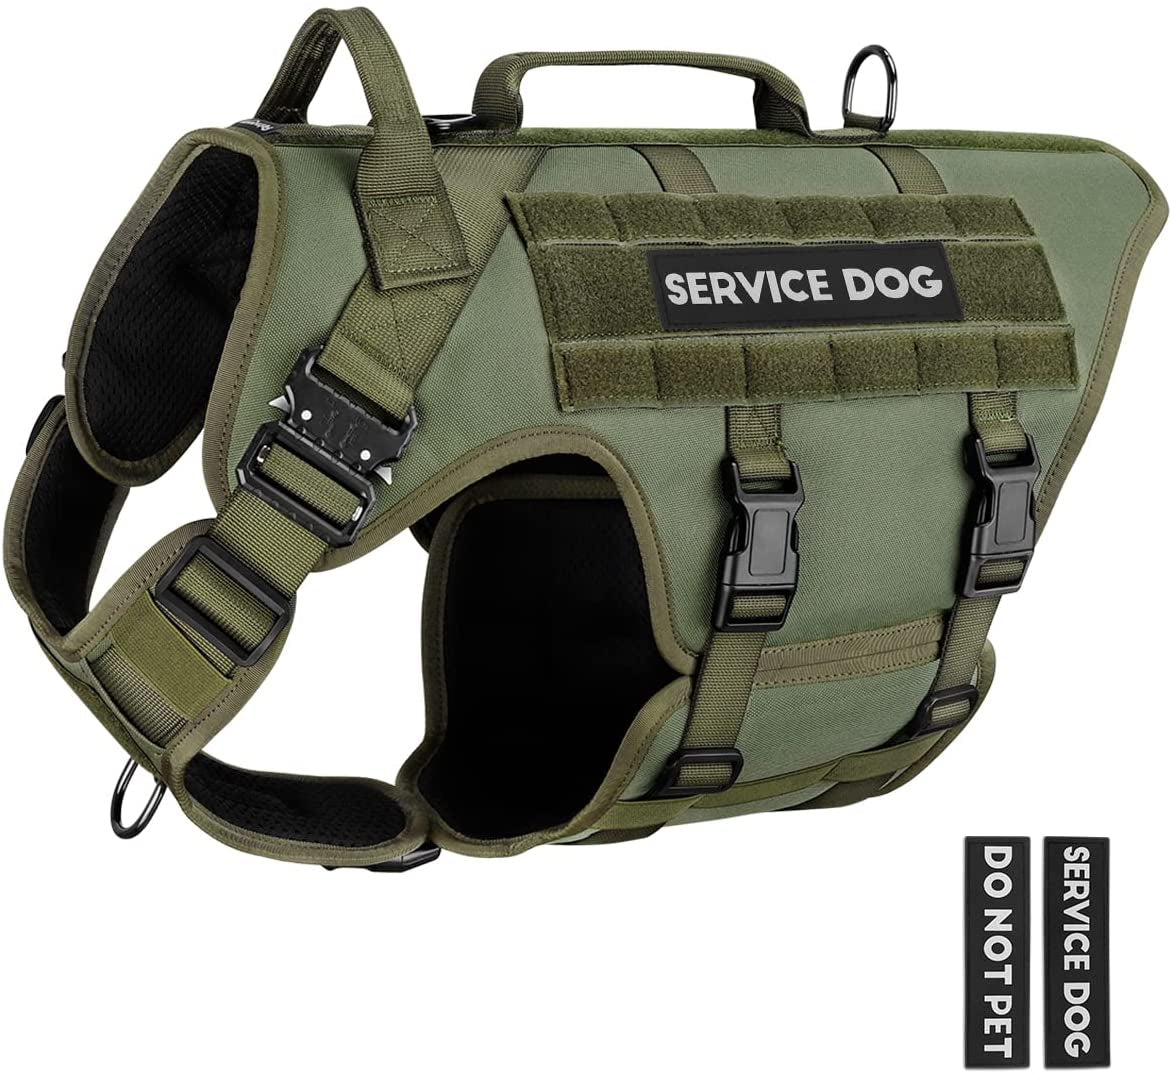 Tactical Dog Harness - PETNANNY Service Dog Vest for Large Dogs Fully Body Coverage in Training Dog Harness with 2 Reflective Dog Patches, Handle, Hook and Loop Panels, Walking Hunting Dog MOLLE Vest